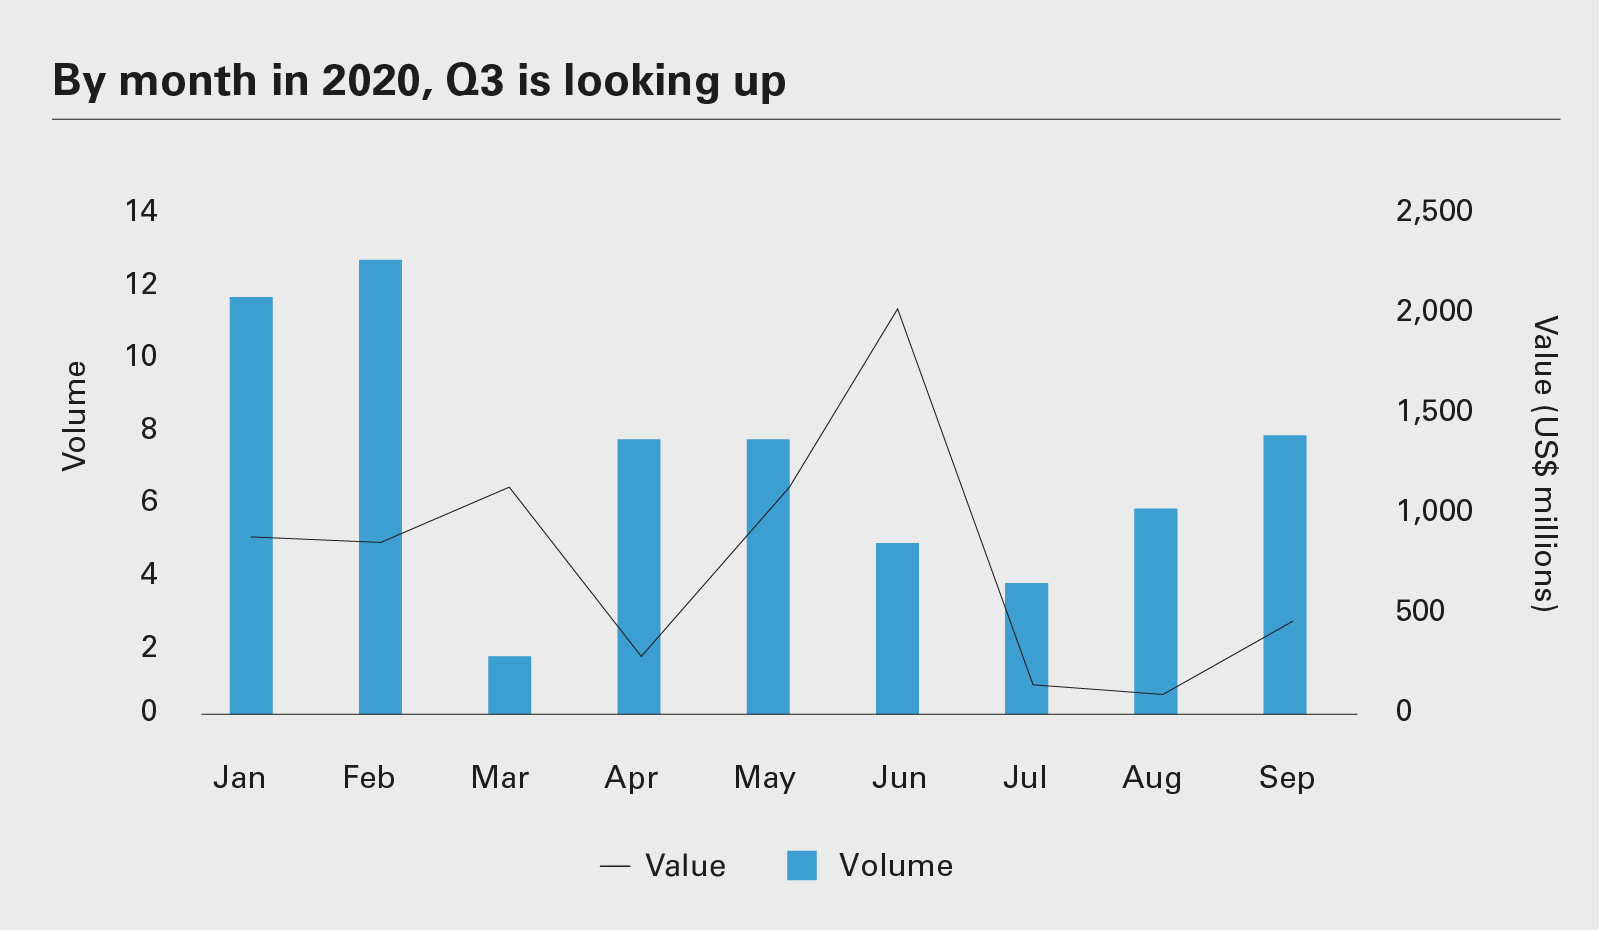 By month in 2020, Q3 is looking up 